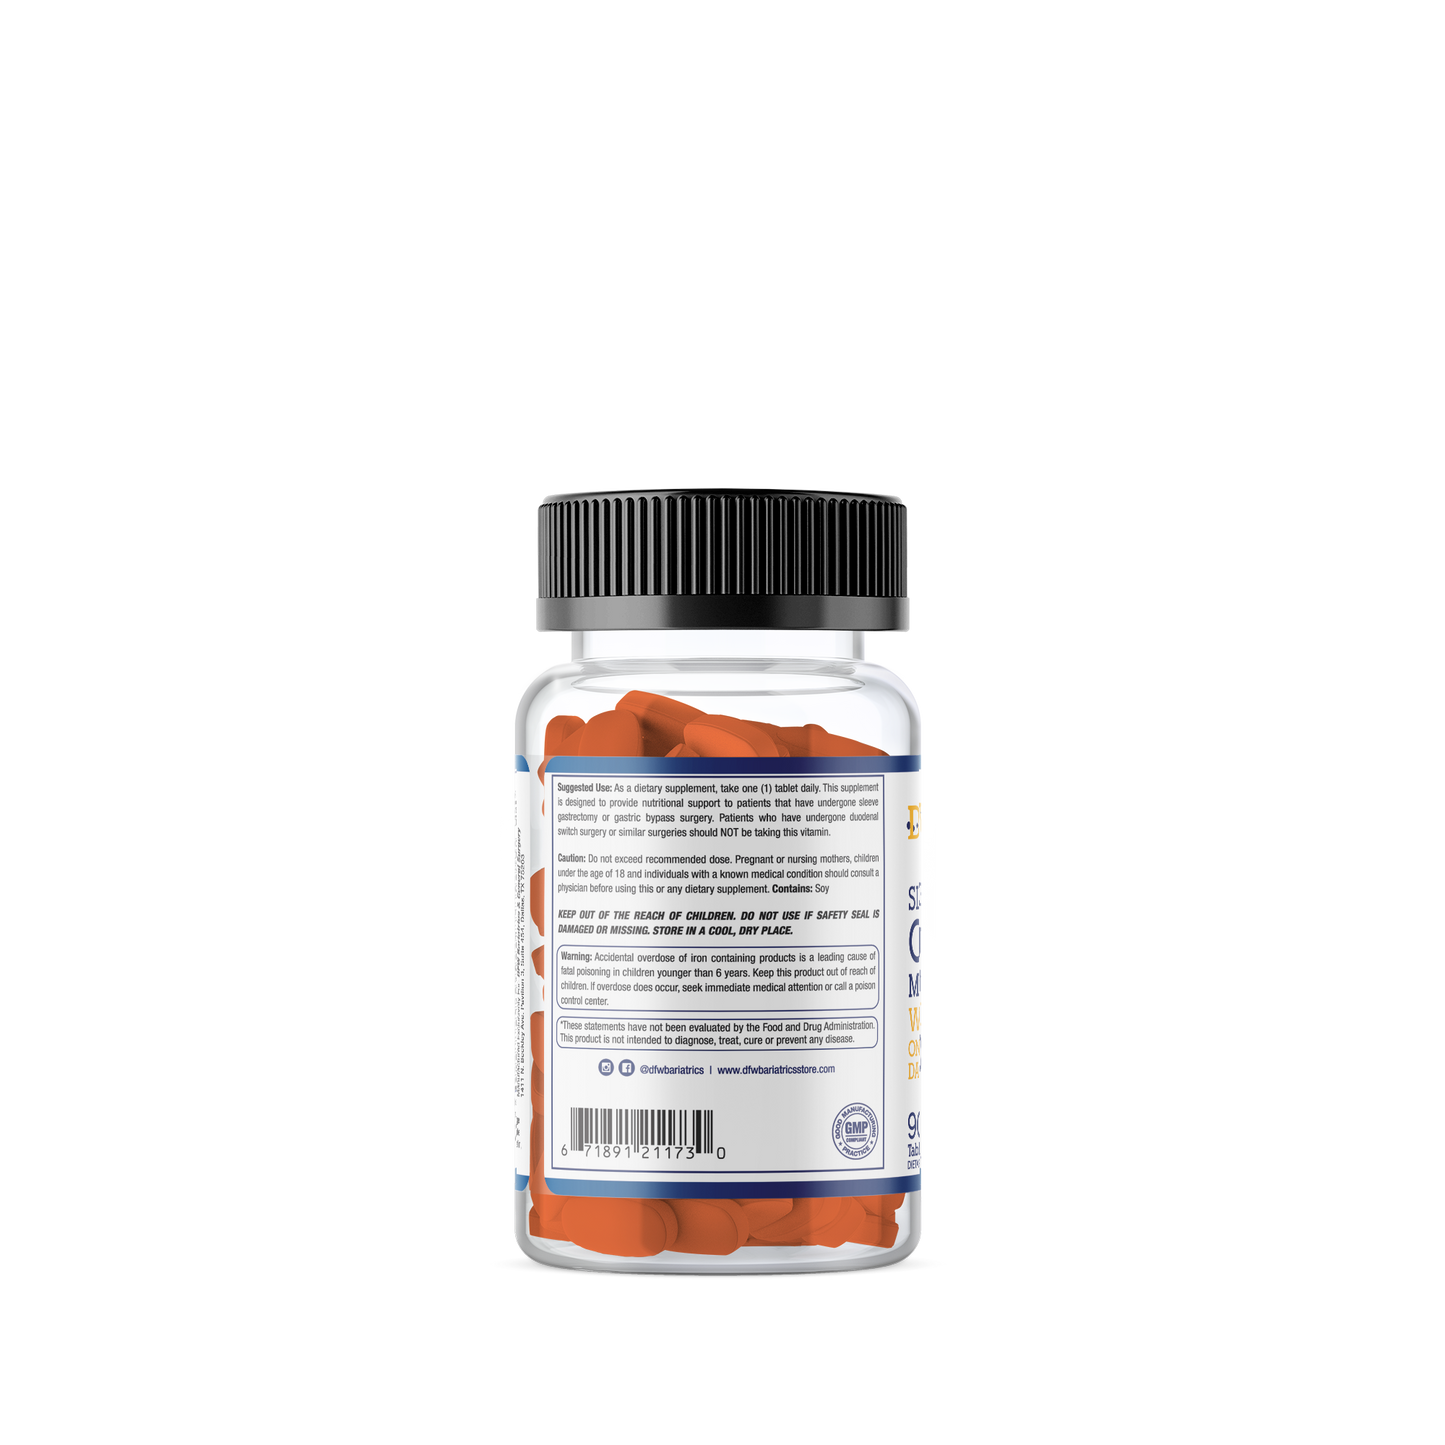 SLEEVE | RYGB Citrus Multivitamin Tablet with Iron - ONCE DAILY | 90 Day Supply